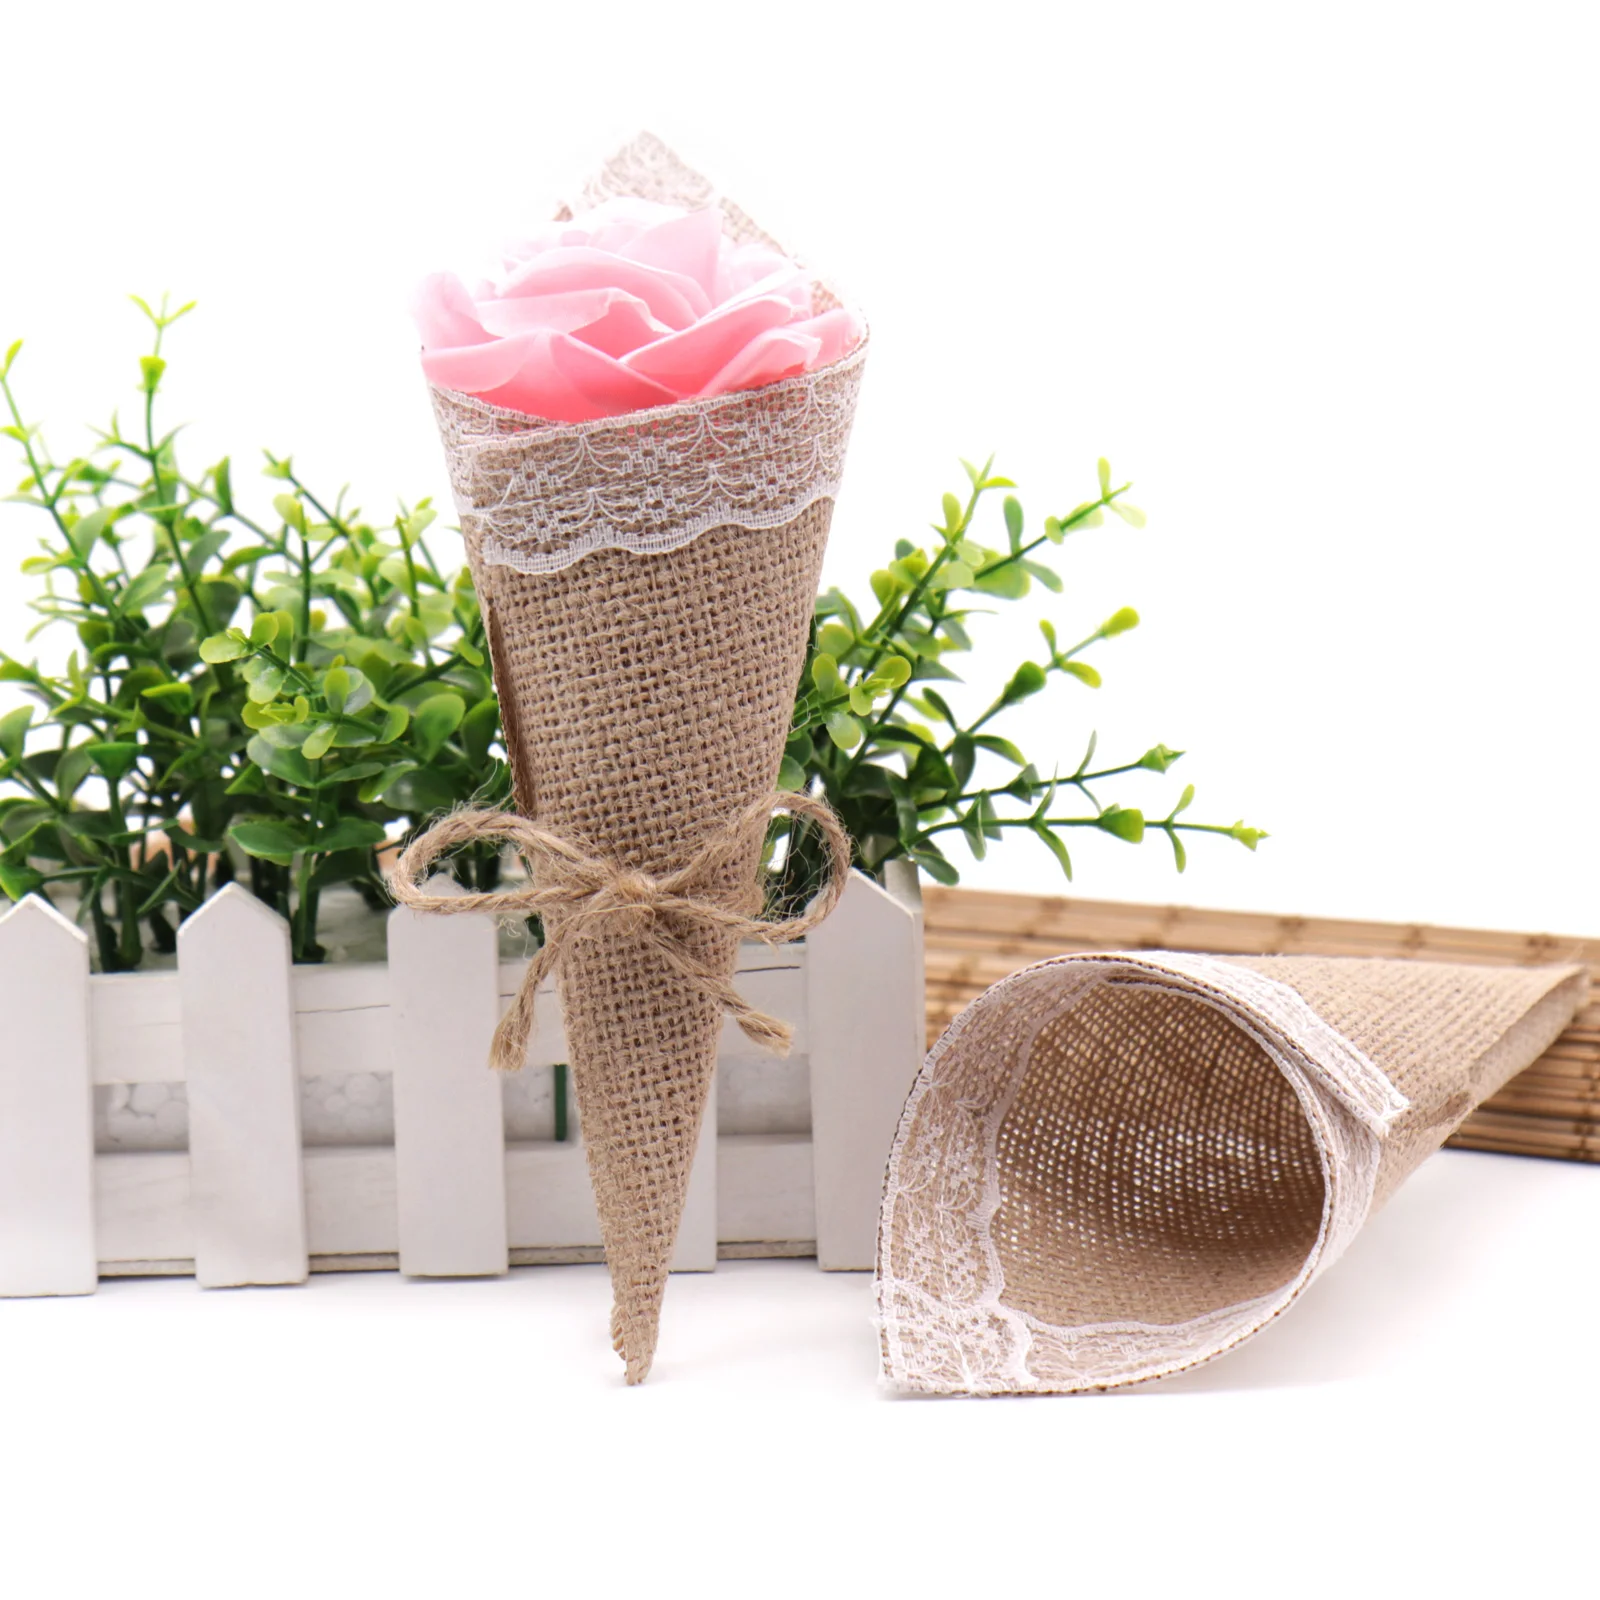 Lace Cone Bouquet 10pcs DIY Creative Burlap Handmade Flower Packaging Box +3M Linen Rope for Wedding Birthday Party Decoration